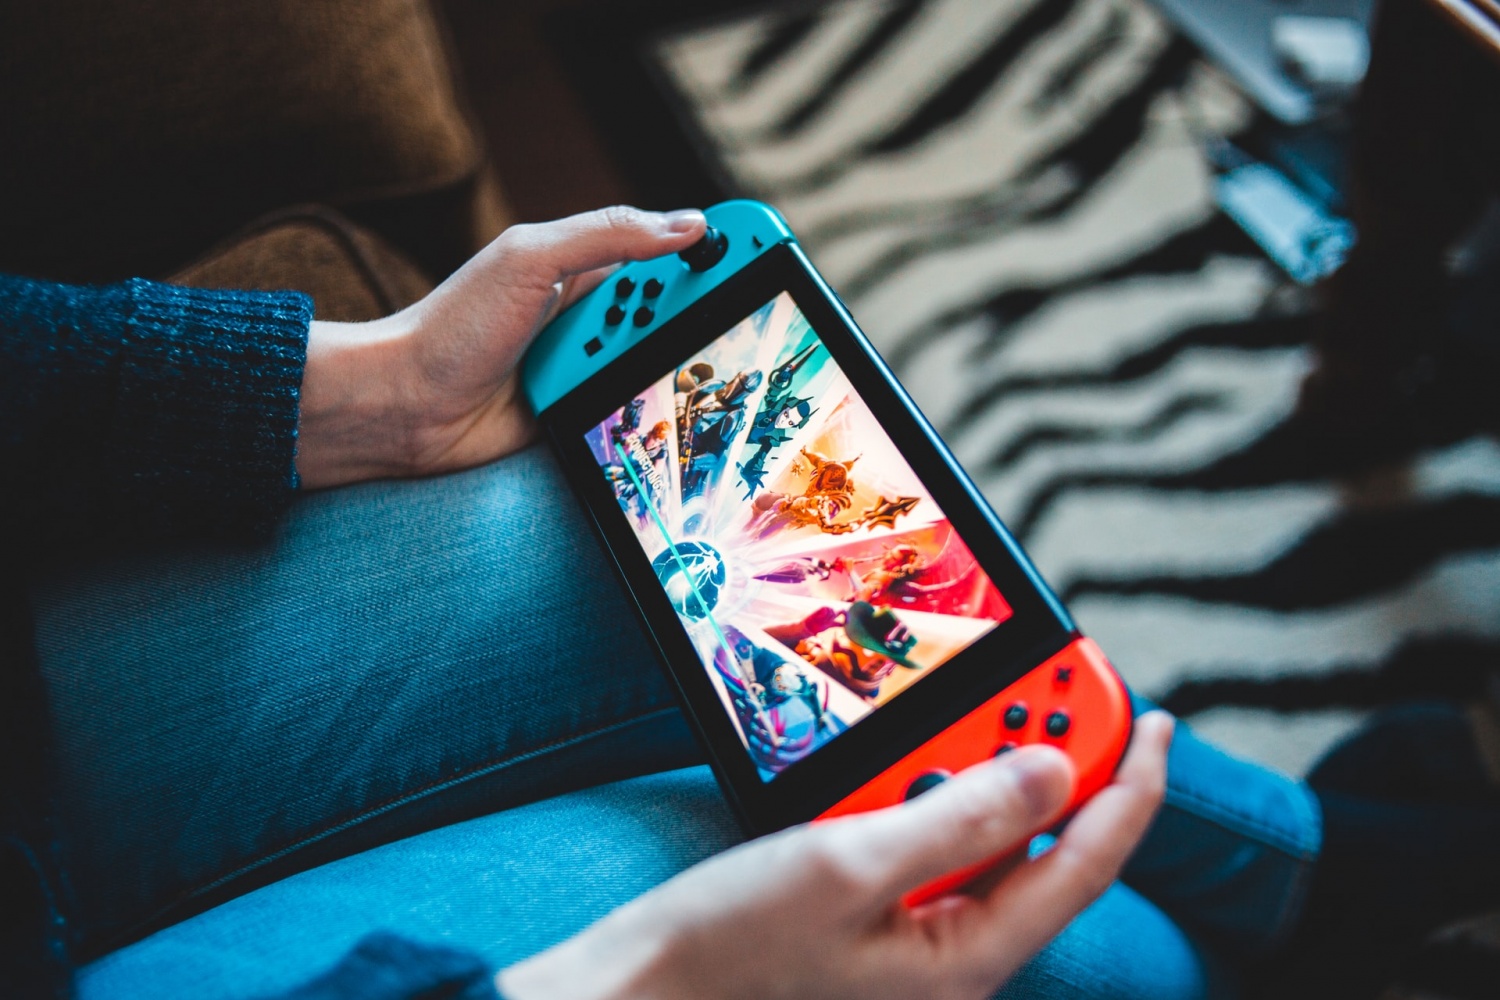 Nintendo Switch Online Update for iOS 14: Users can Send Friend Requests